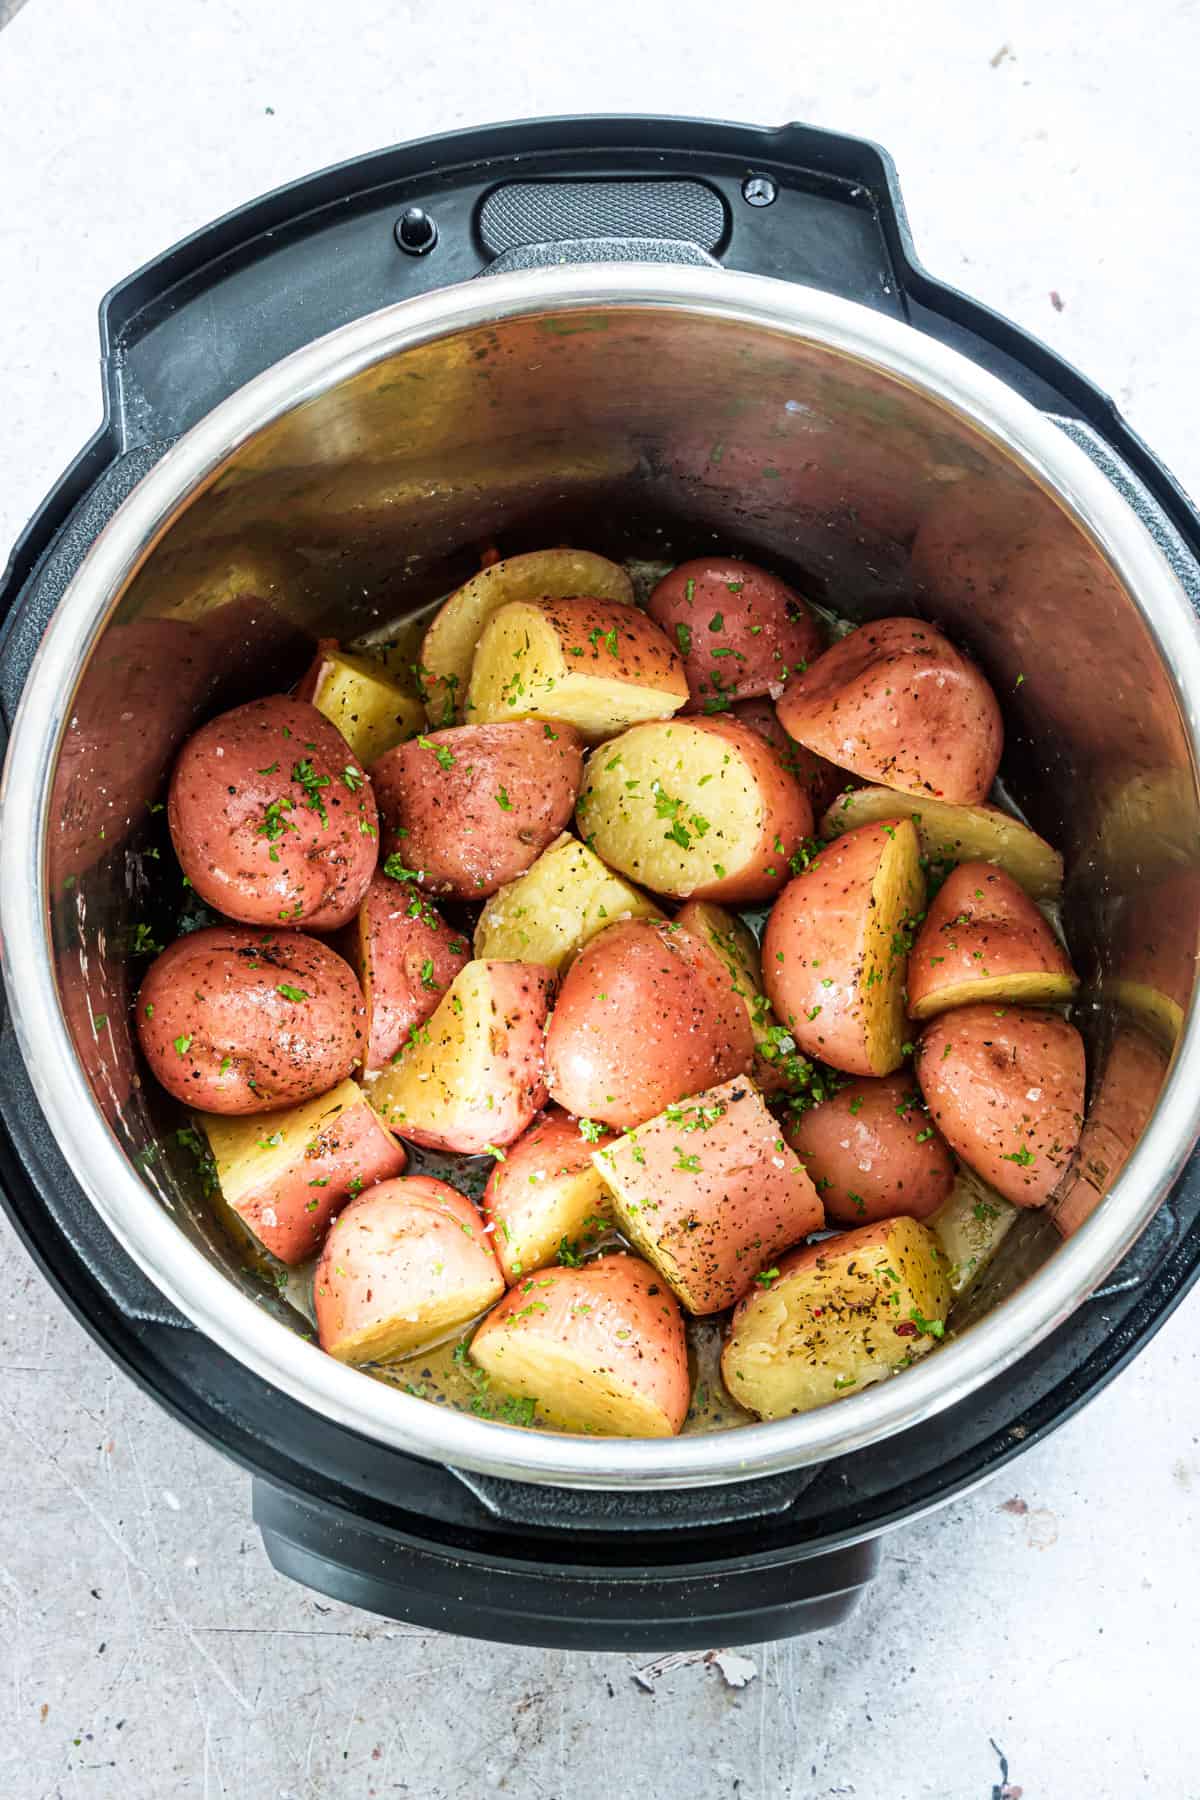 How Long Do You Cook Potatoes In An Electric Pressure Cooker